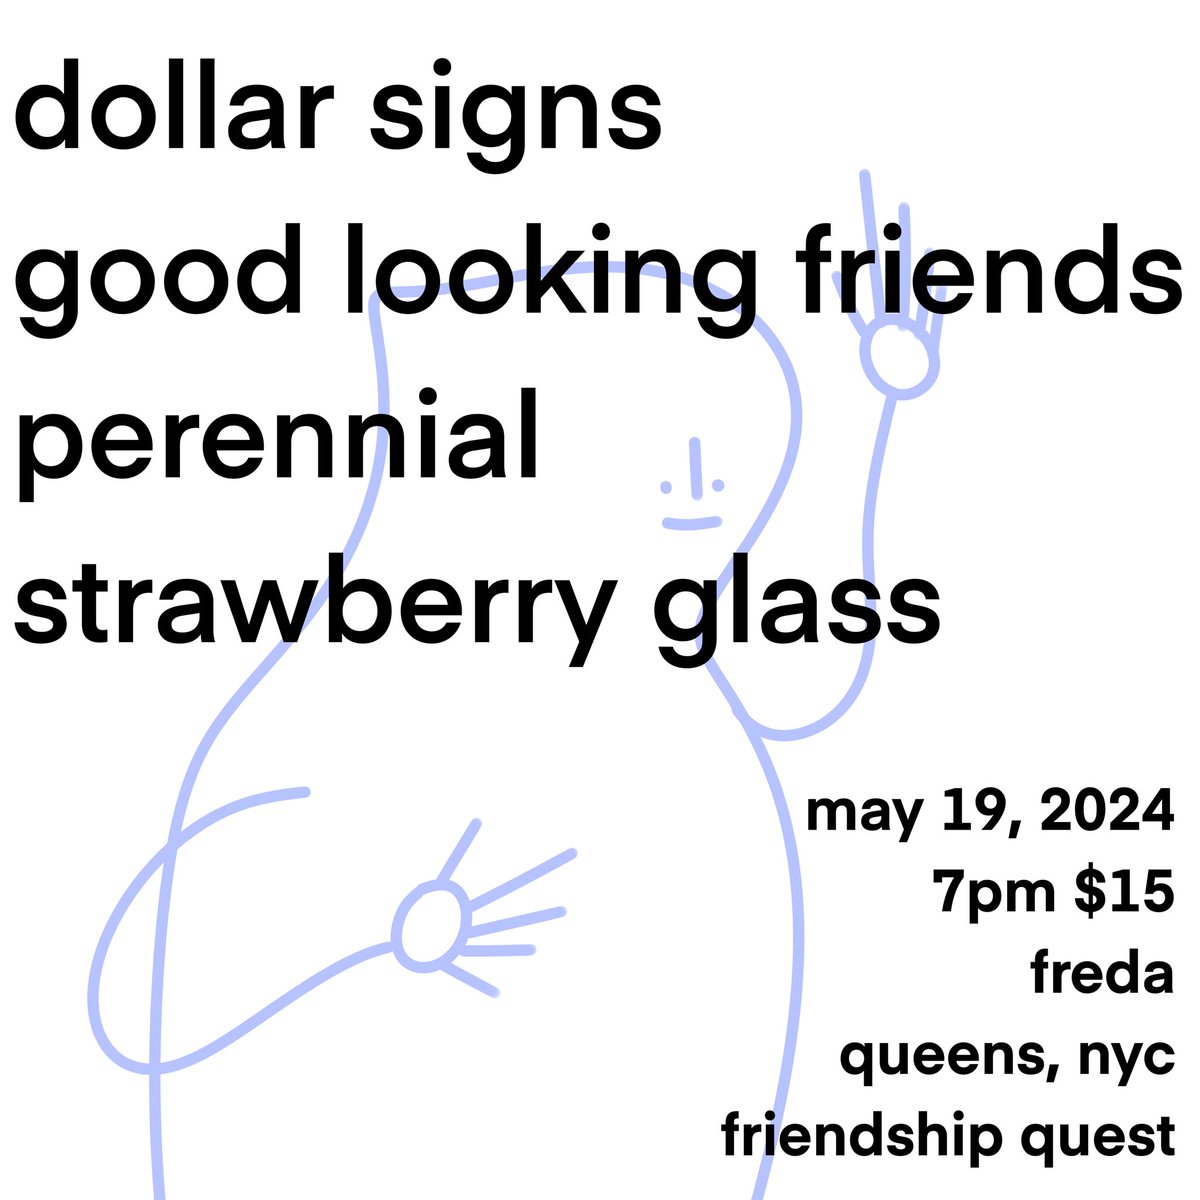 Booked this sick show for @DollarSignsBand @Perennialband @glf_ny and Strawberry Glass on 5/19 in Queens. Come thru!